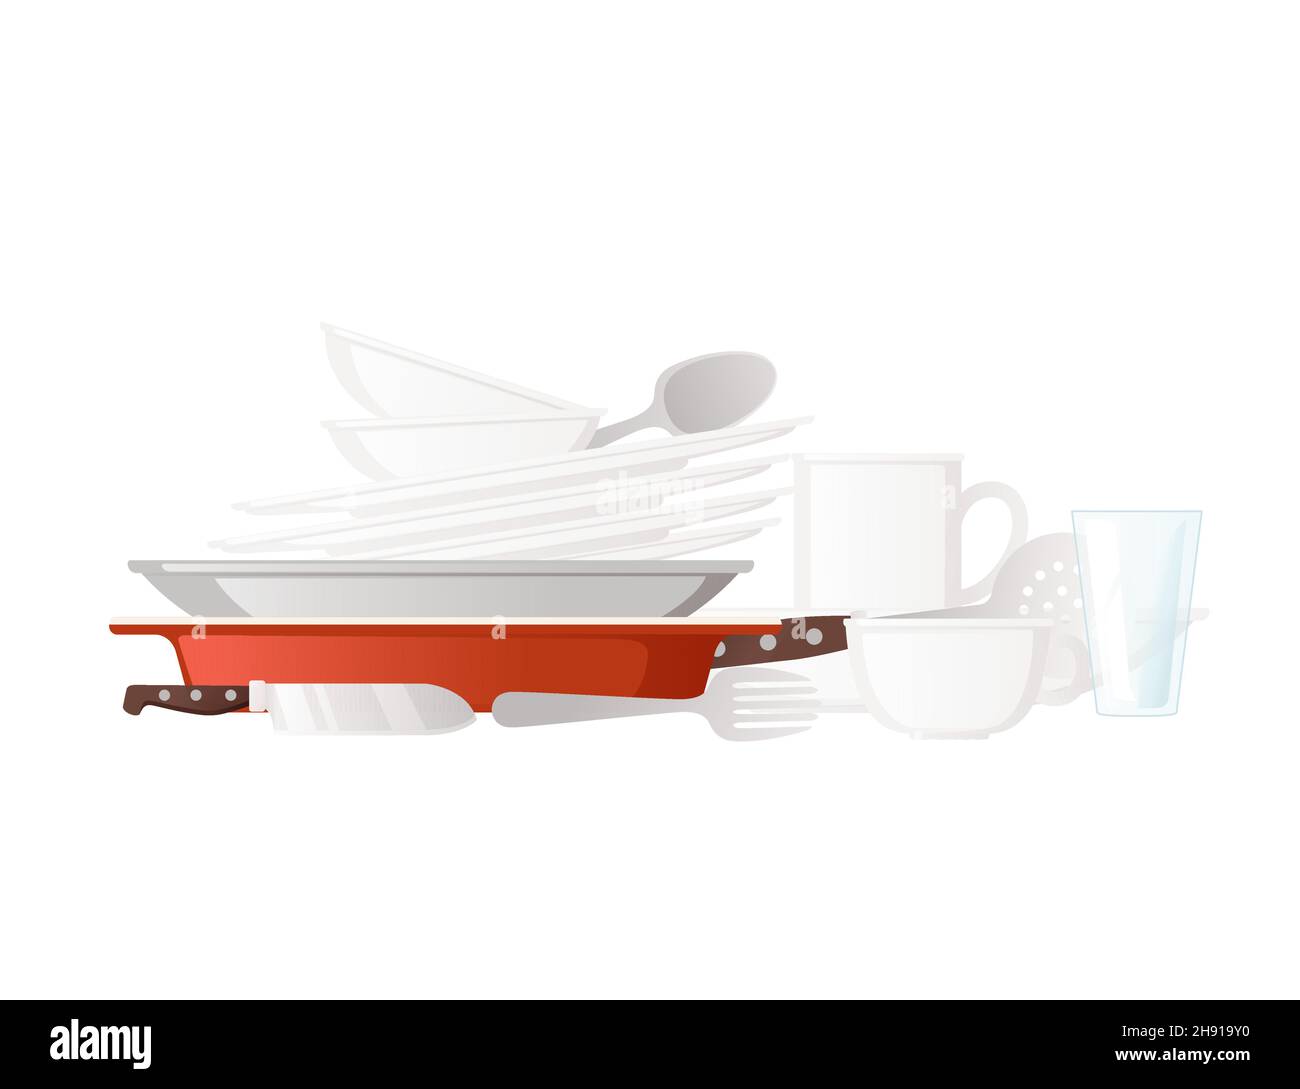 Clean stack of kitchen dishware and utensils vector illustration on white background Stock Vector